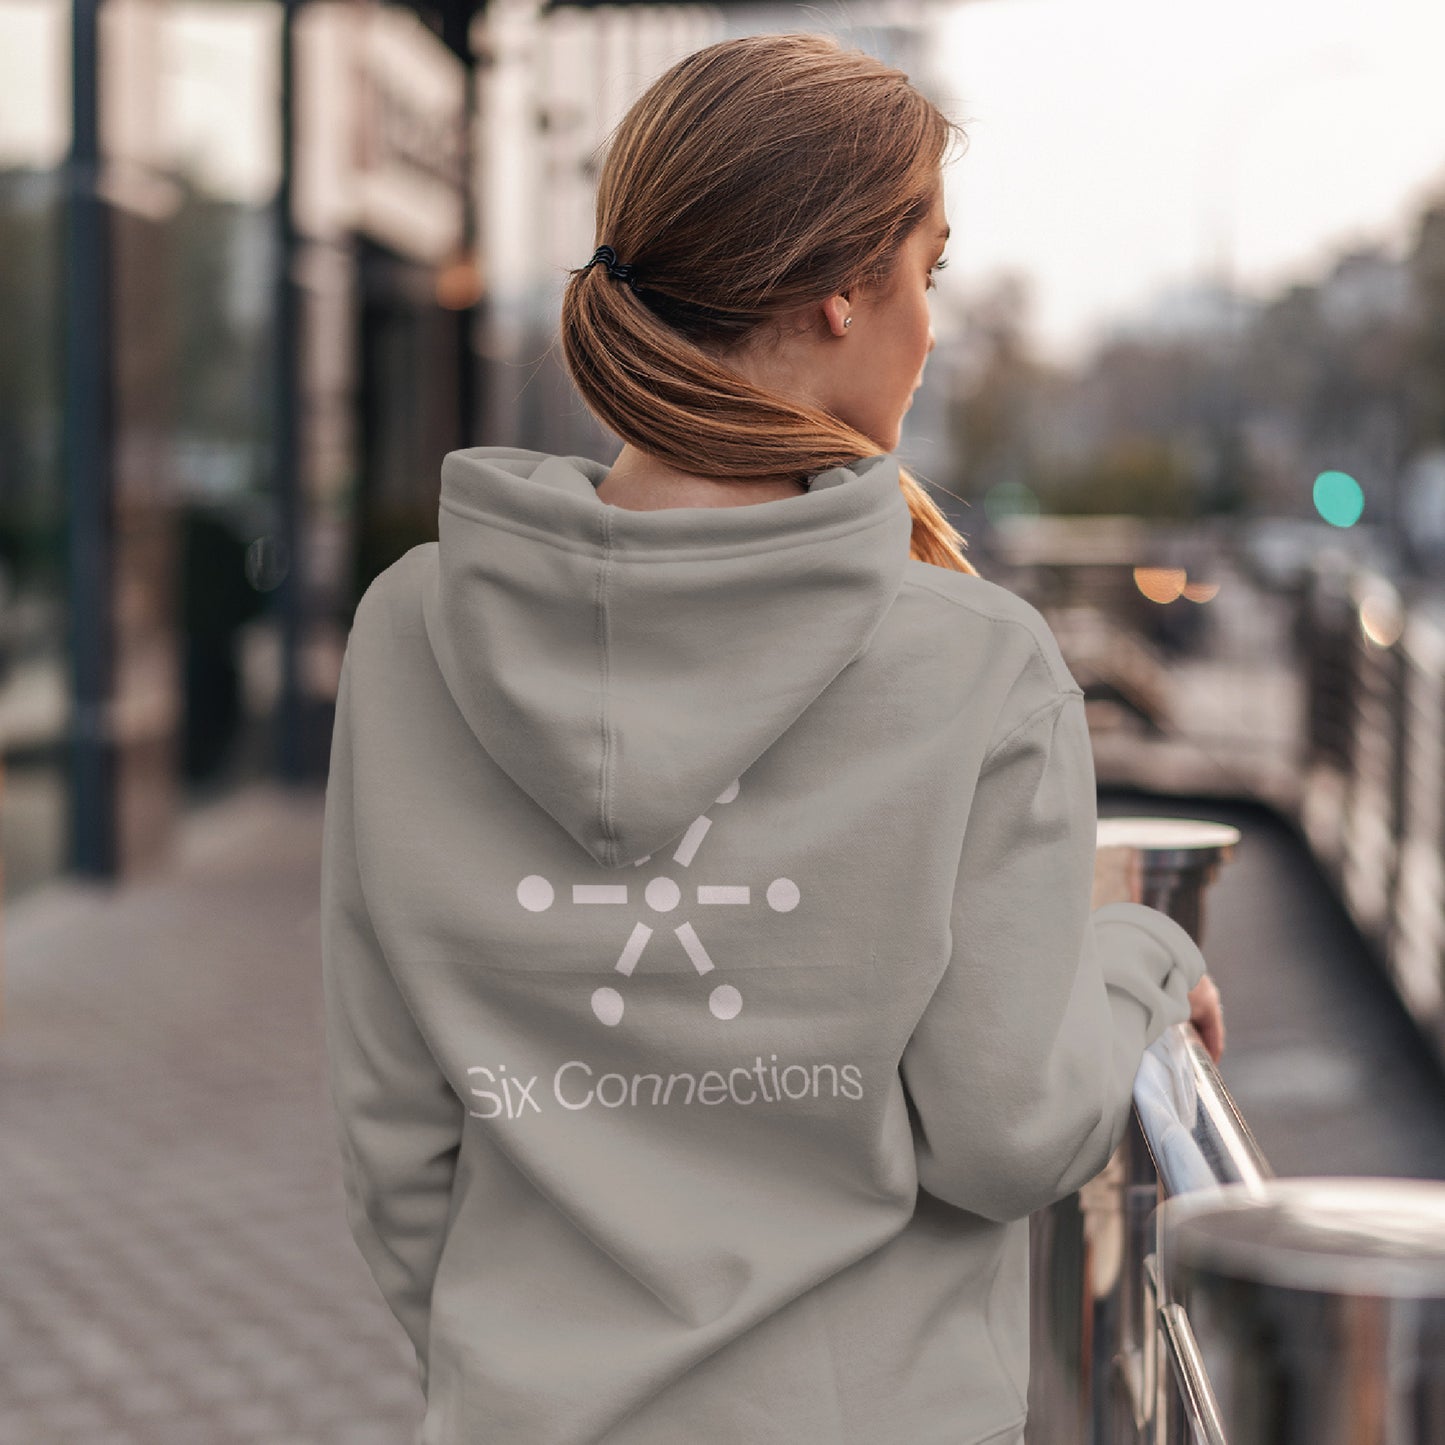 Six Connections Hoodie